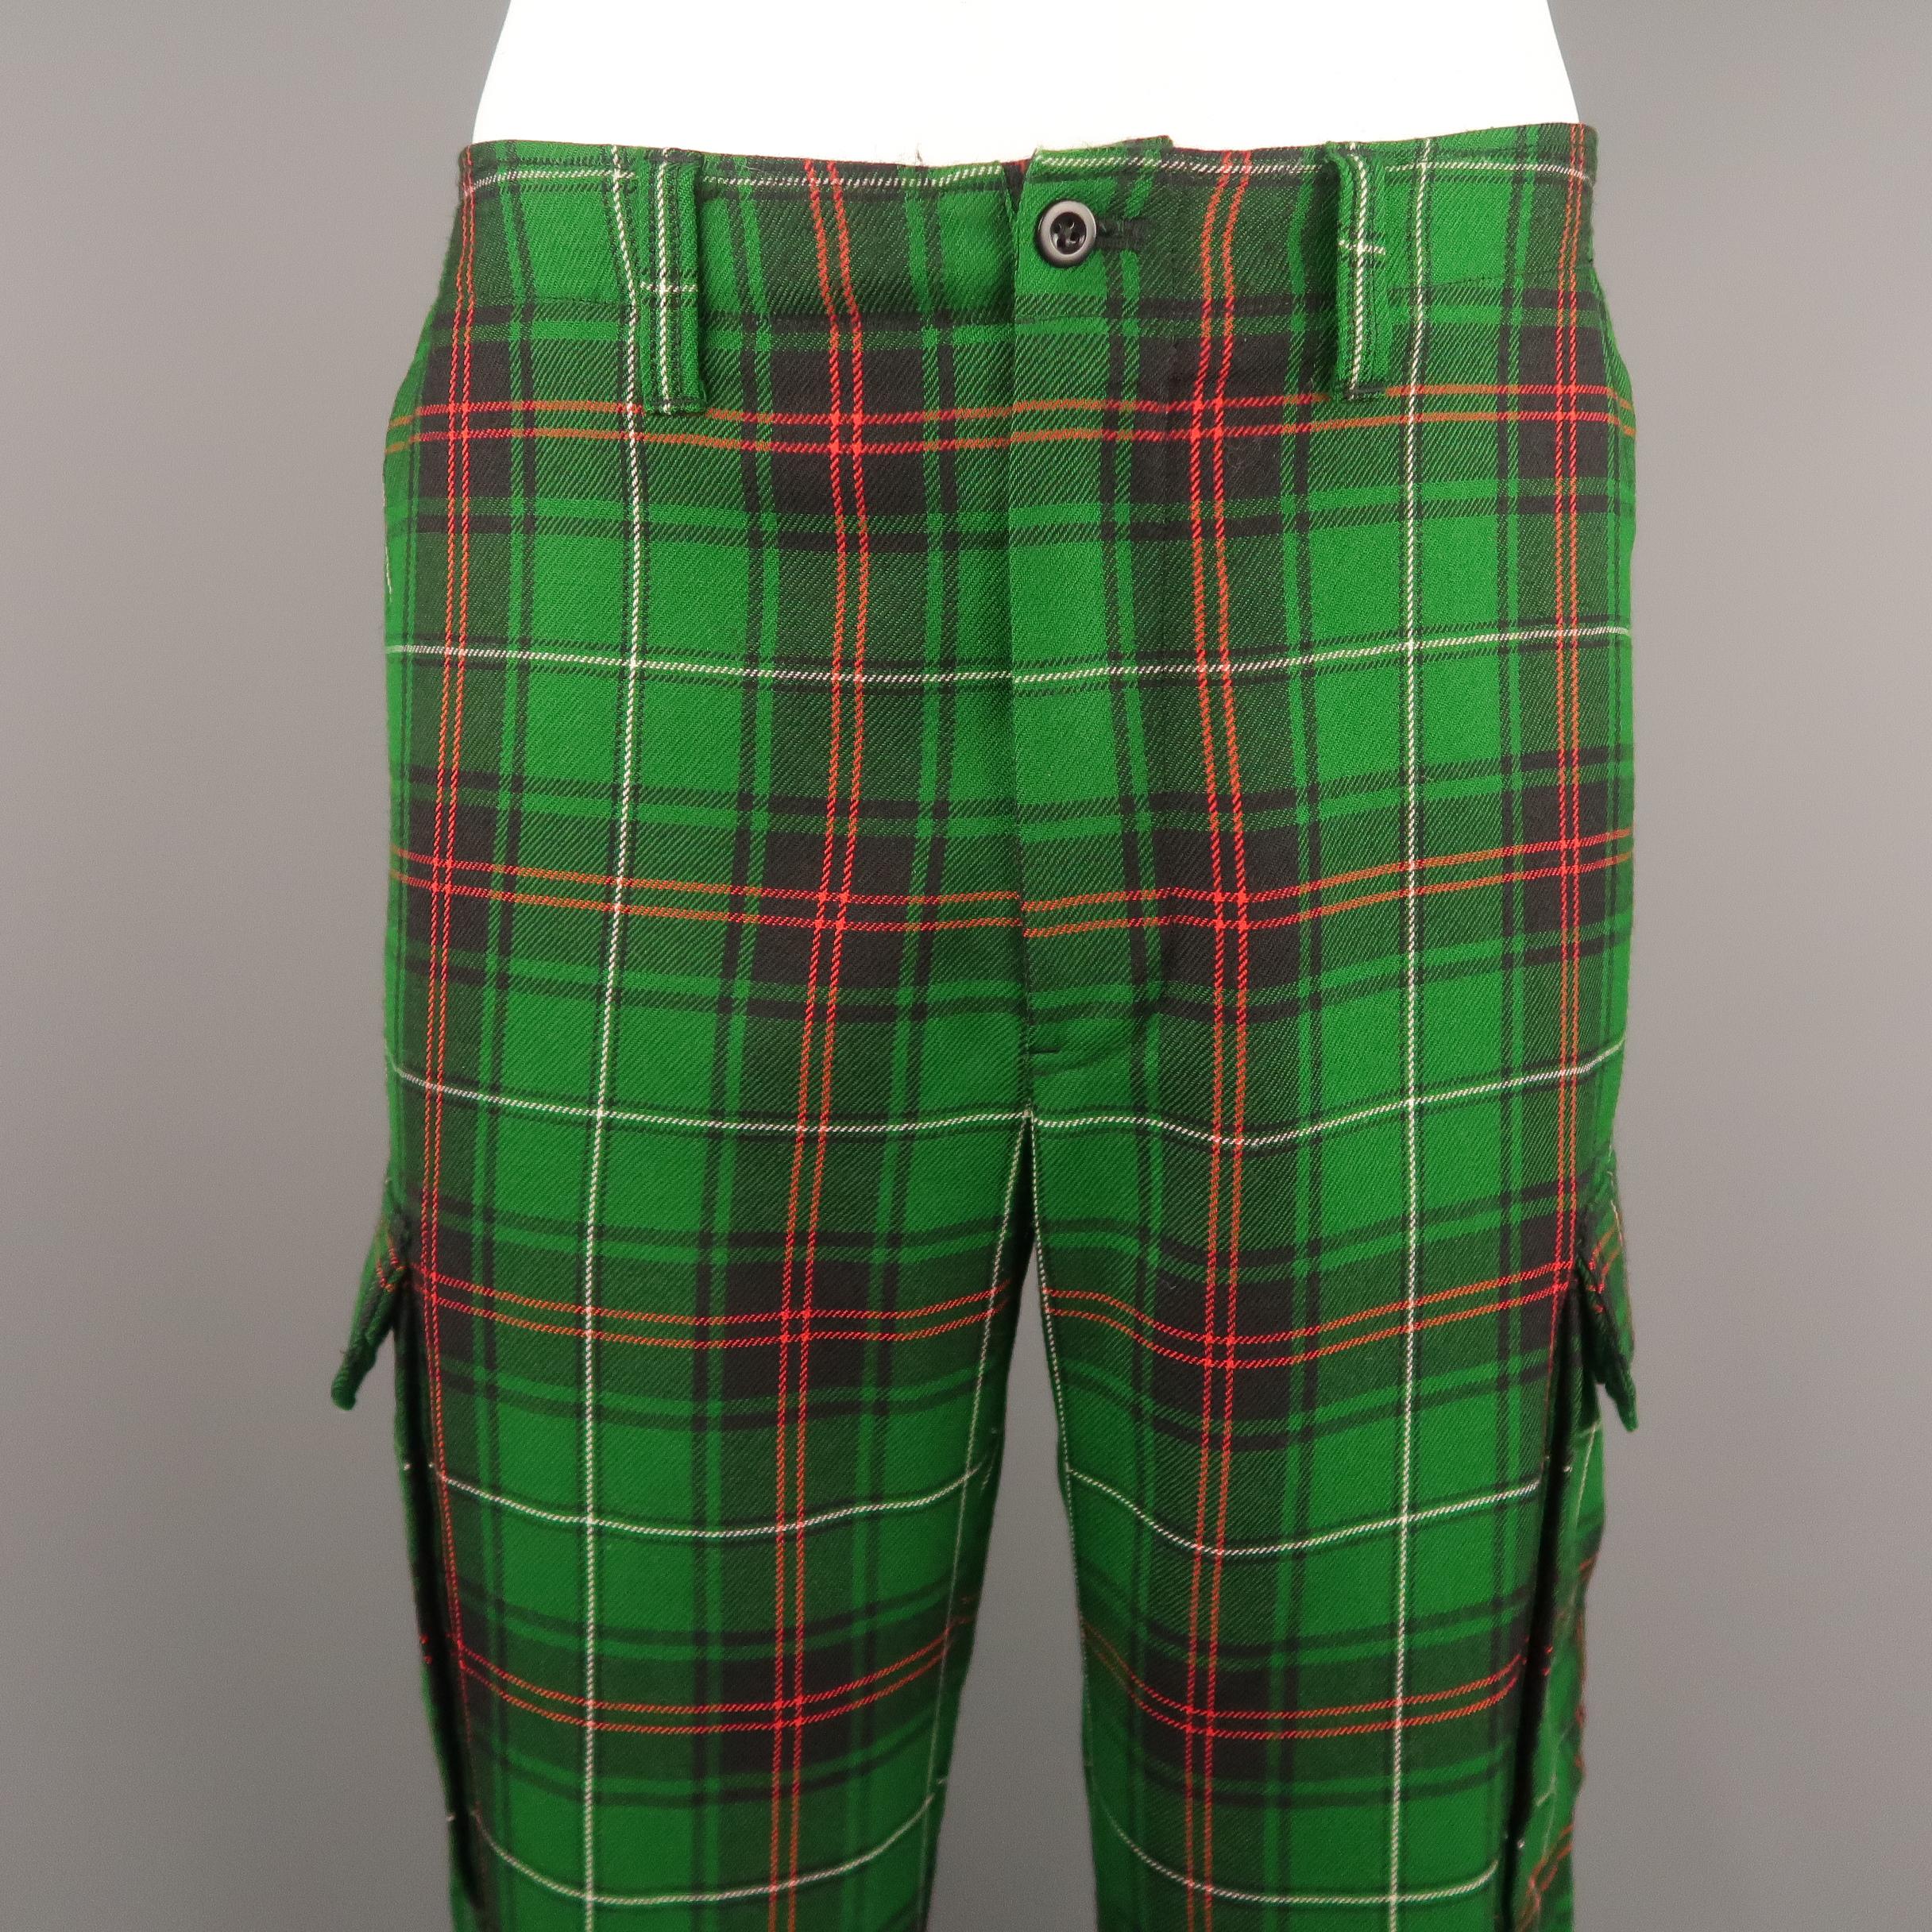 POLO RALPH LAUREN pants come in green, red, black, and white plaid wool with a zip fly and cargo pockets.
 
Excellent Pre-Owned Condition.
Marked: 35/32
 
Measurements:
 
Waist: 37 in.
Rise: 11.5 in.
Inseam: 32 in.